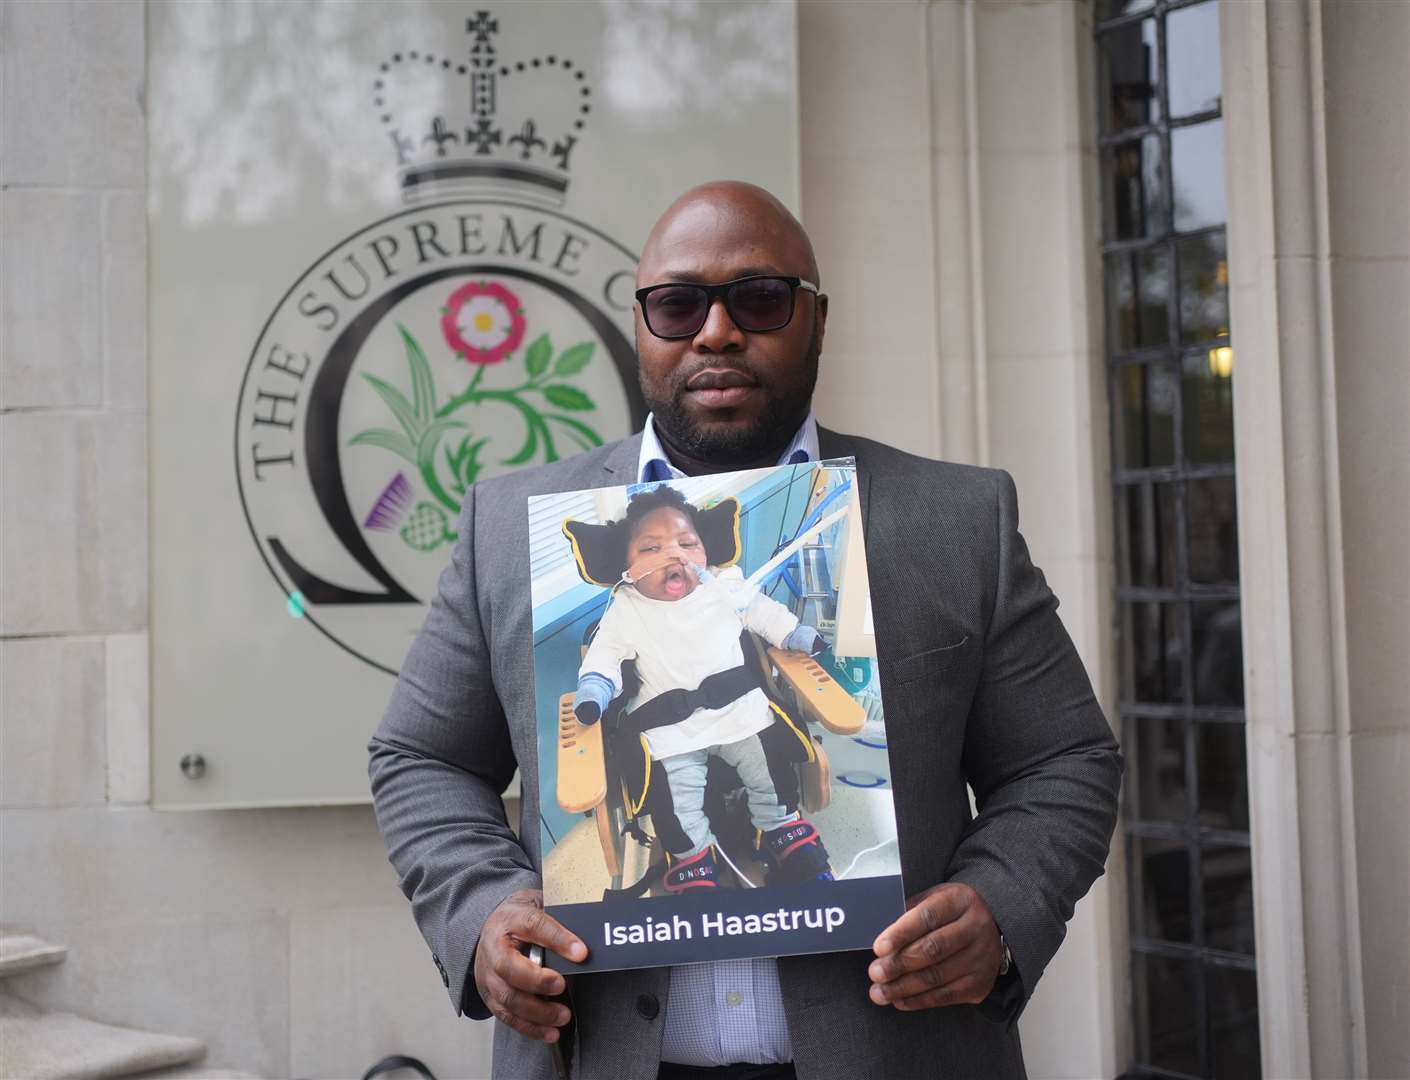 Lanre Haastru hold a picture of his son, Isaiah Haastrup, outside the Supreme Court (Yui Mok/PA)